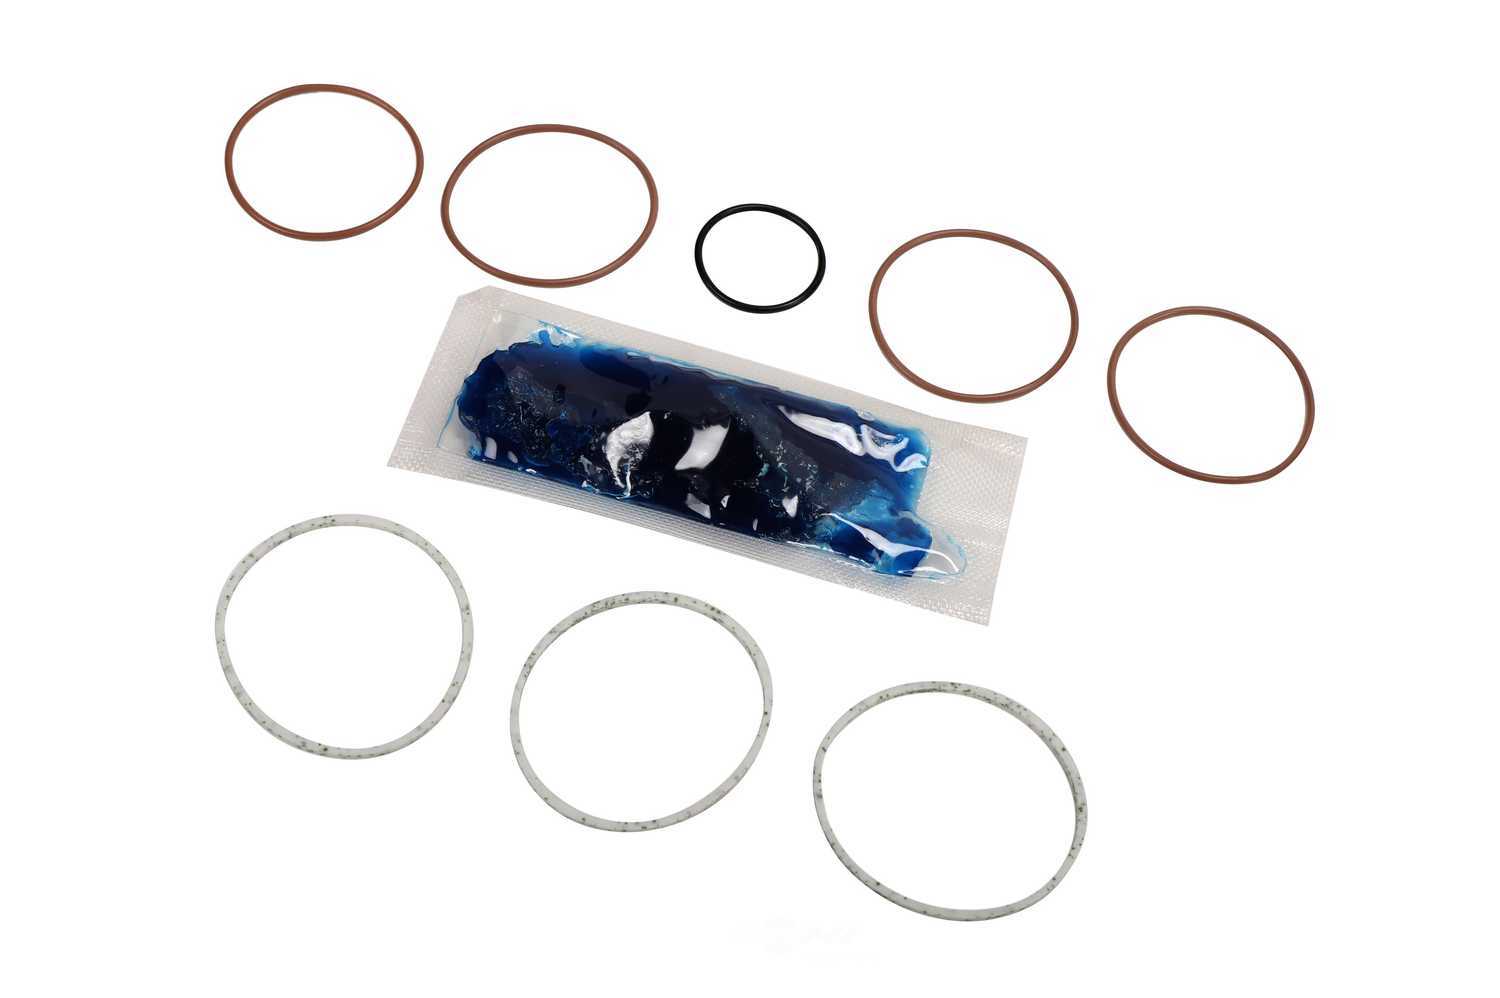 GM GENUINE PARTS - Steering Gear Seal Kit - GMP 05687182